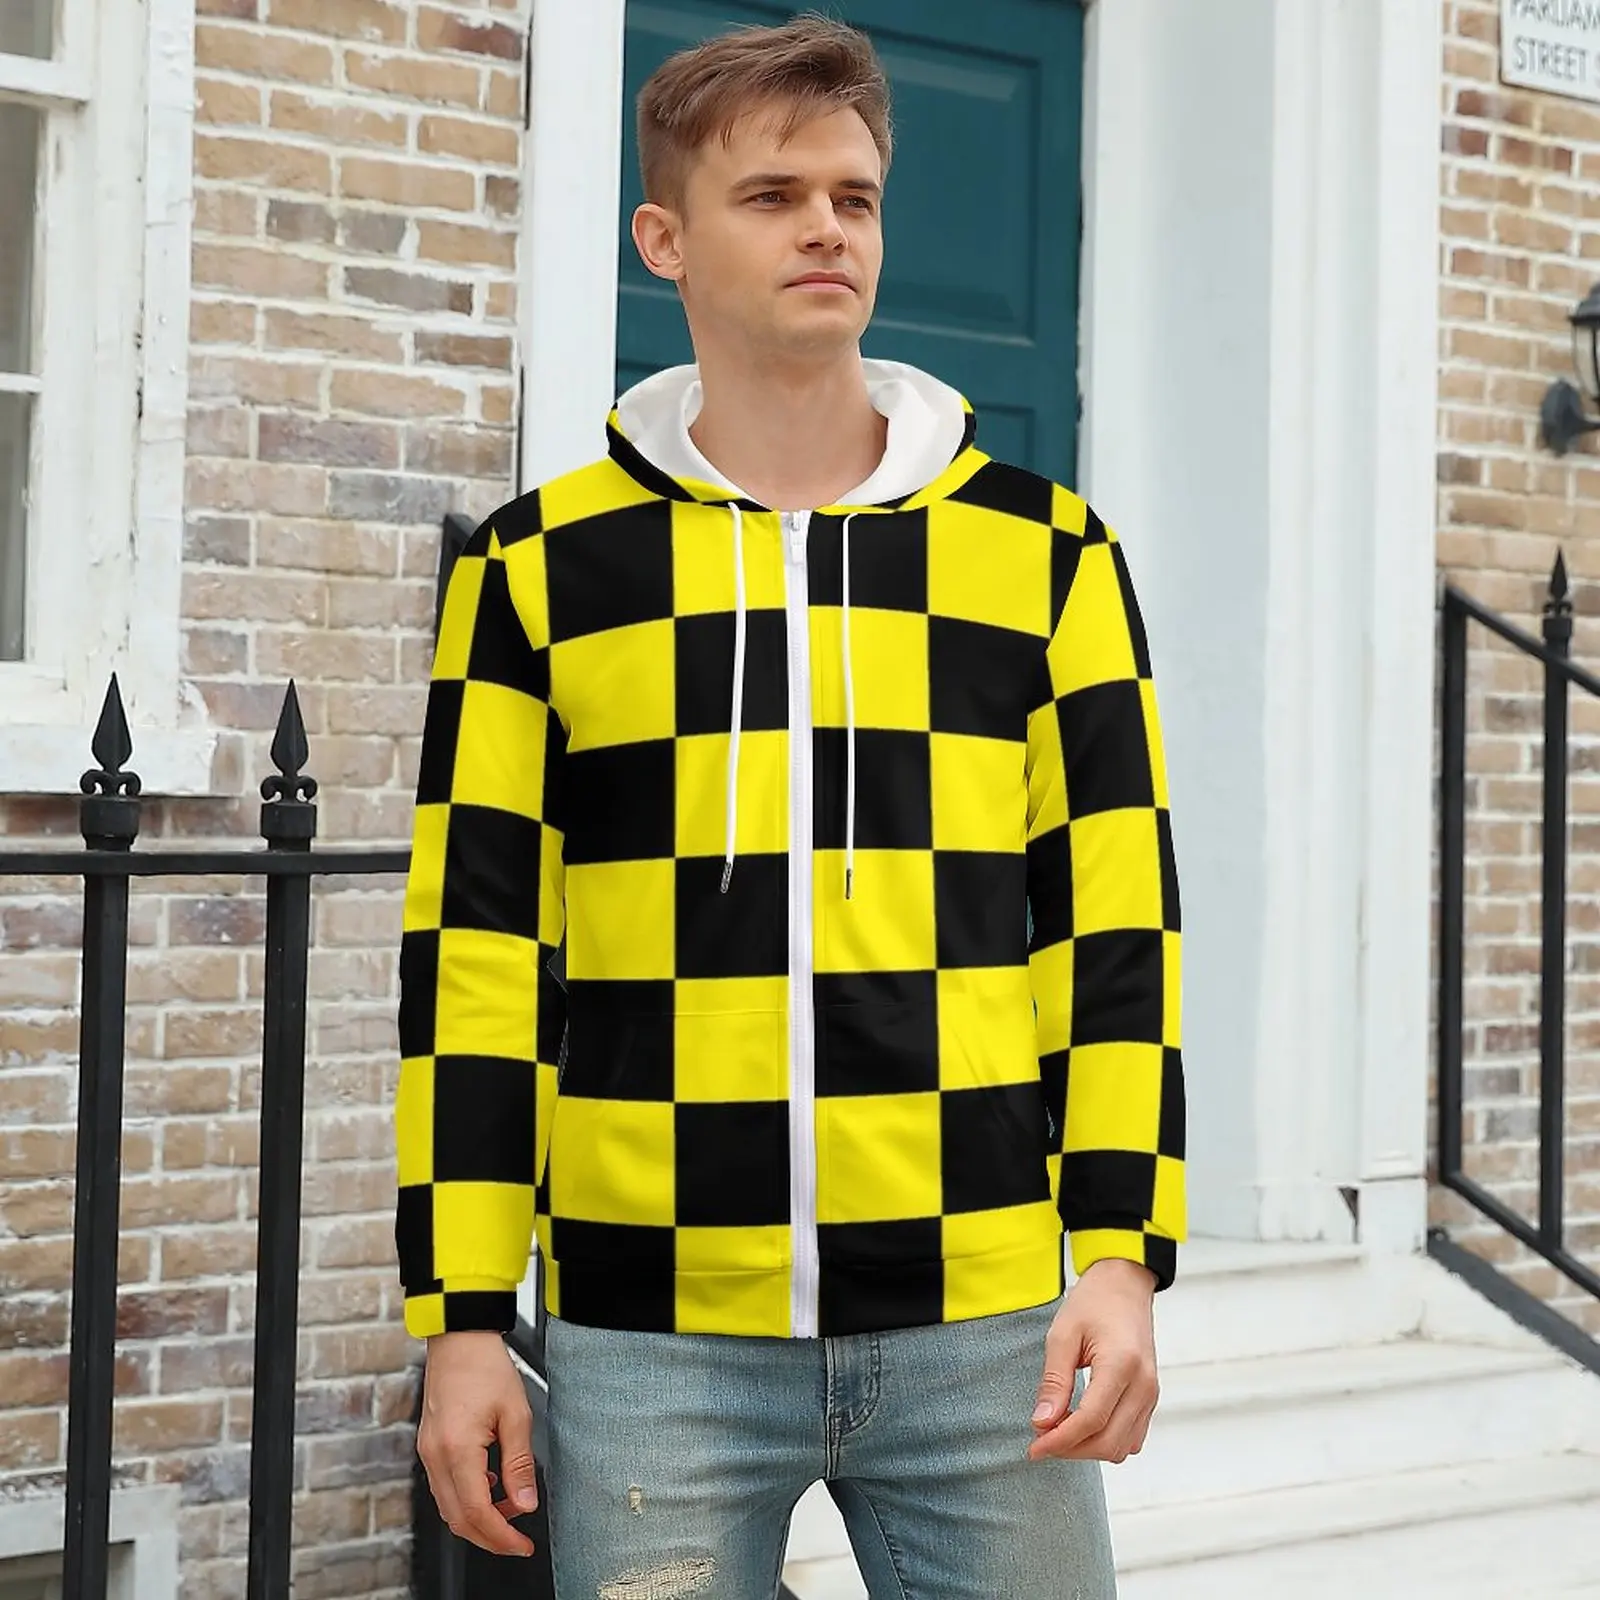 Two Tone Black And Yellow Hoodie Mod Checkers For Men Autumn Hoodies Outdoor Zip Up Hoodie Over Size